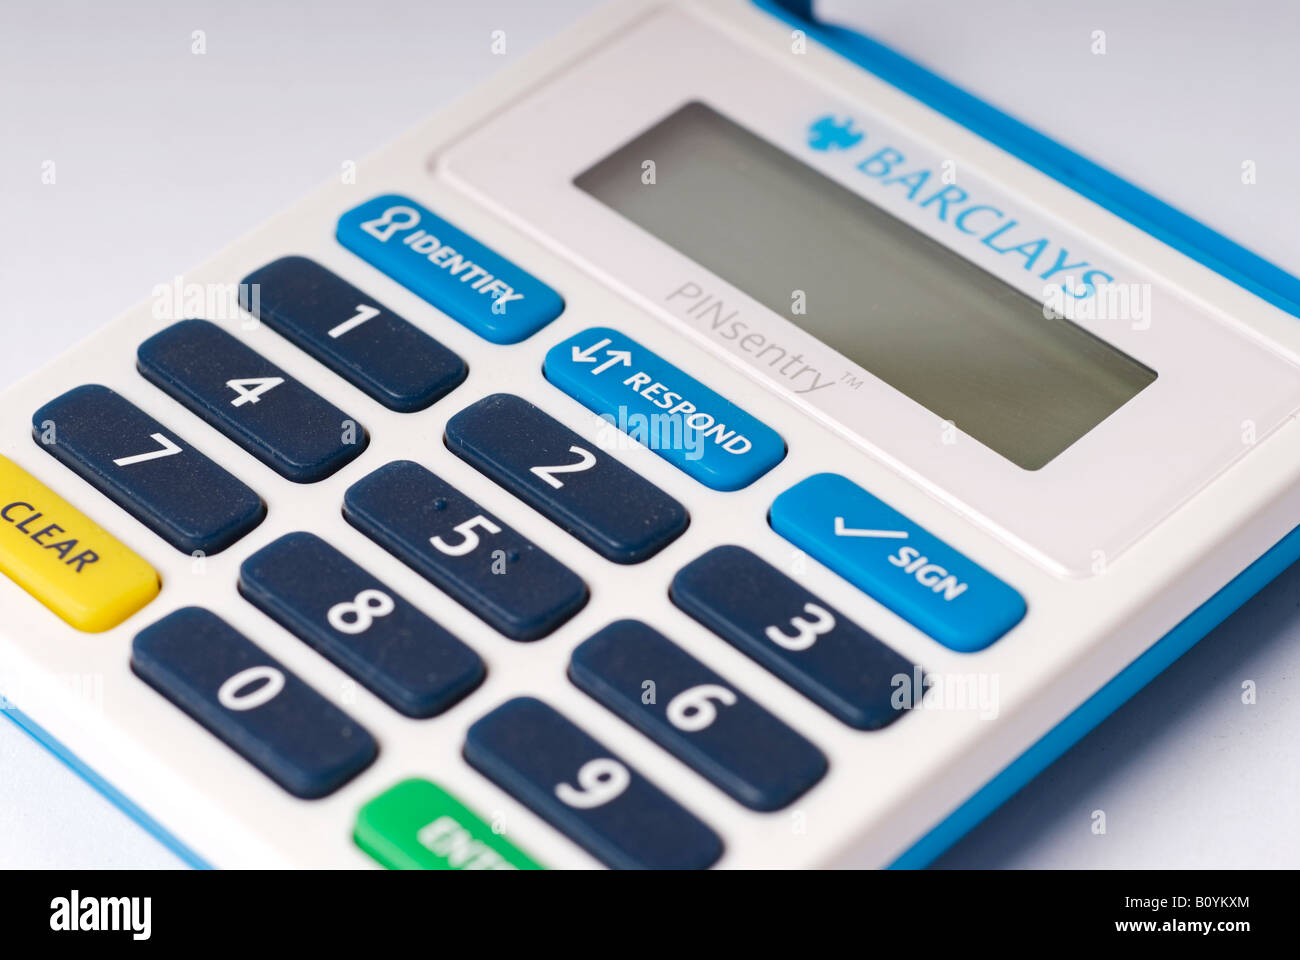 Stock photo of a Barclays PINSENTRY card reader Stock Photo